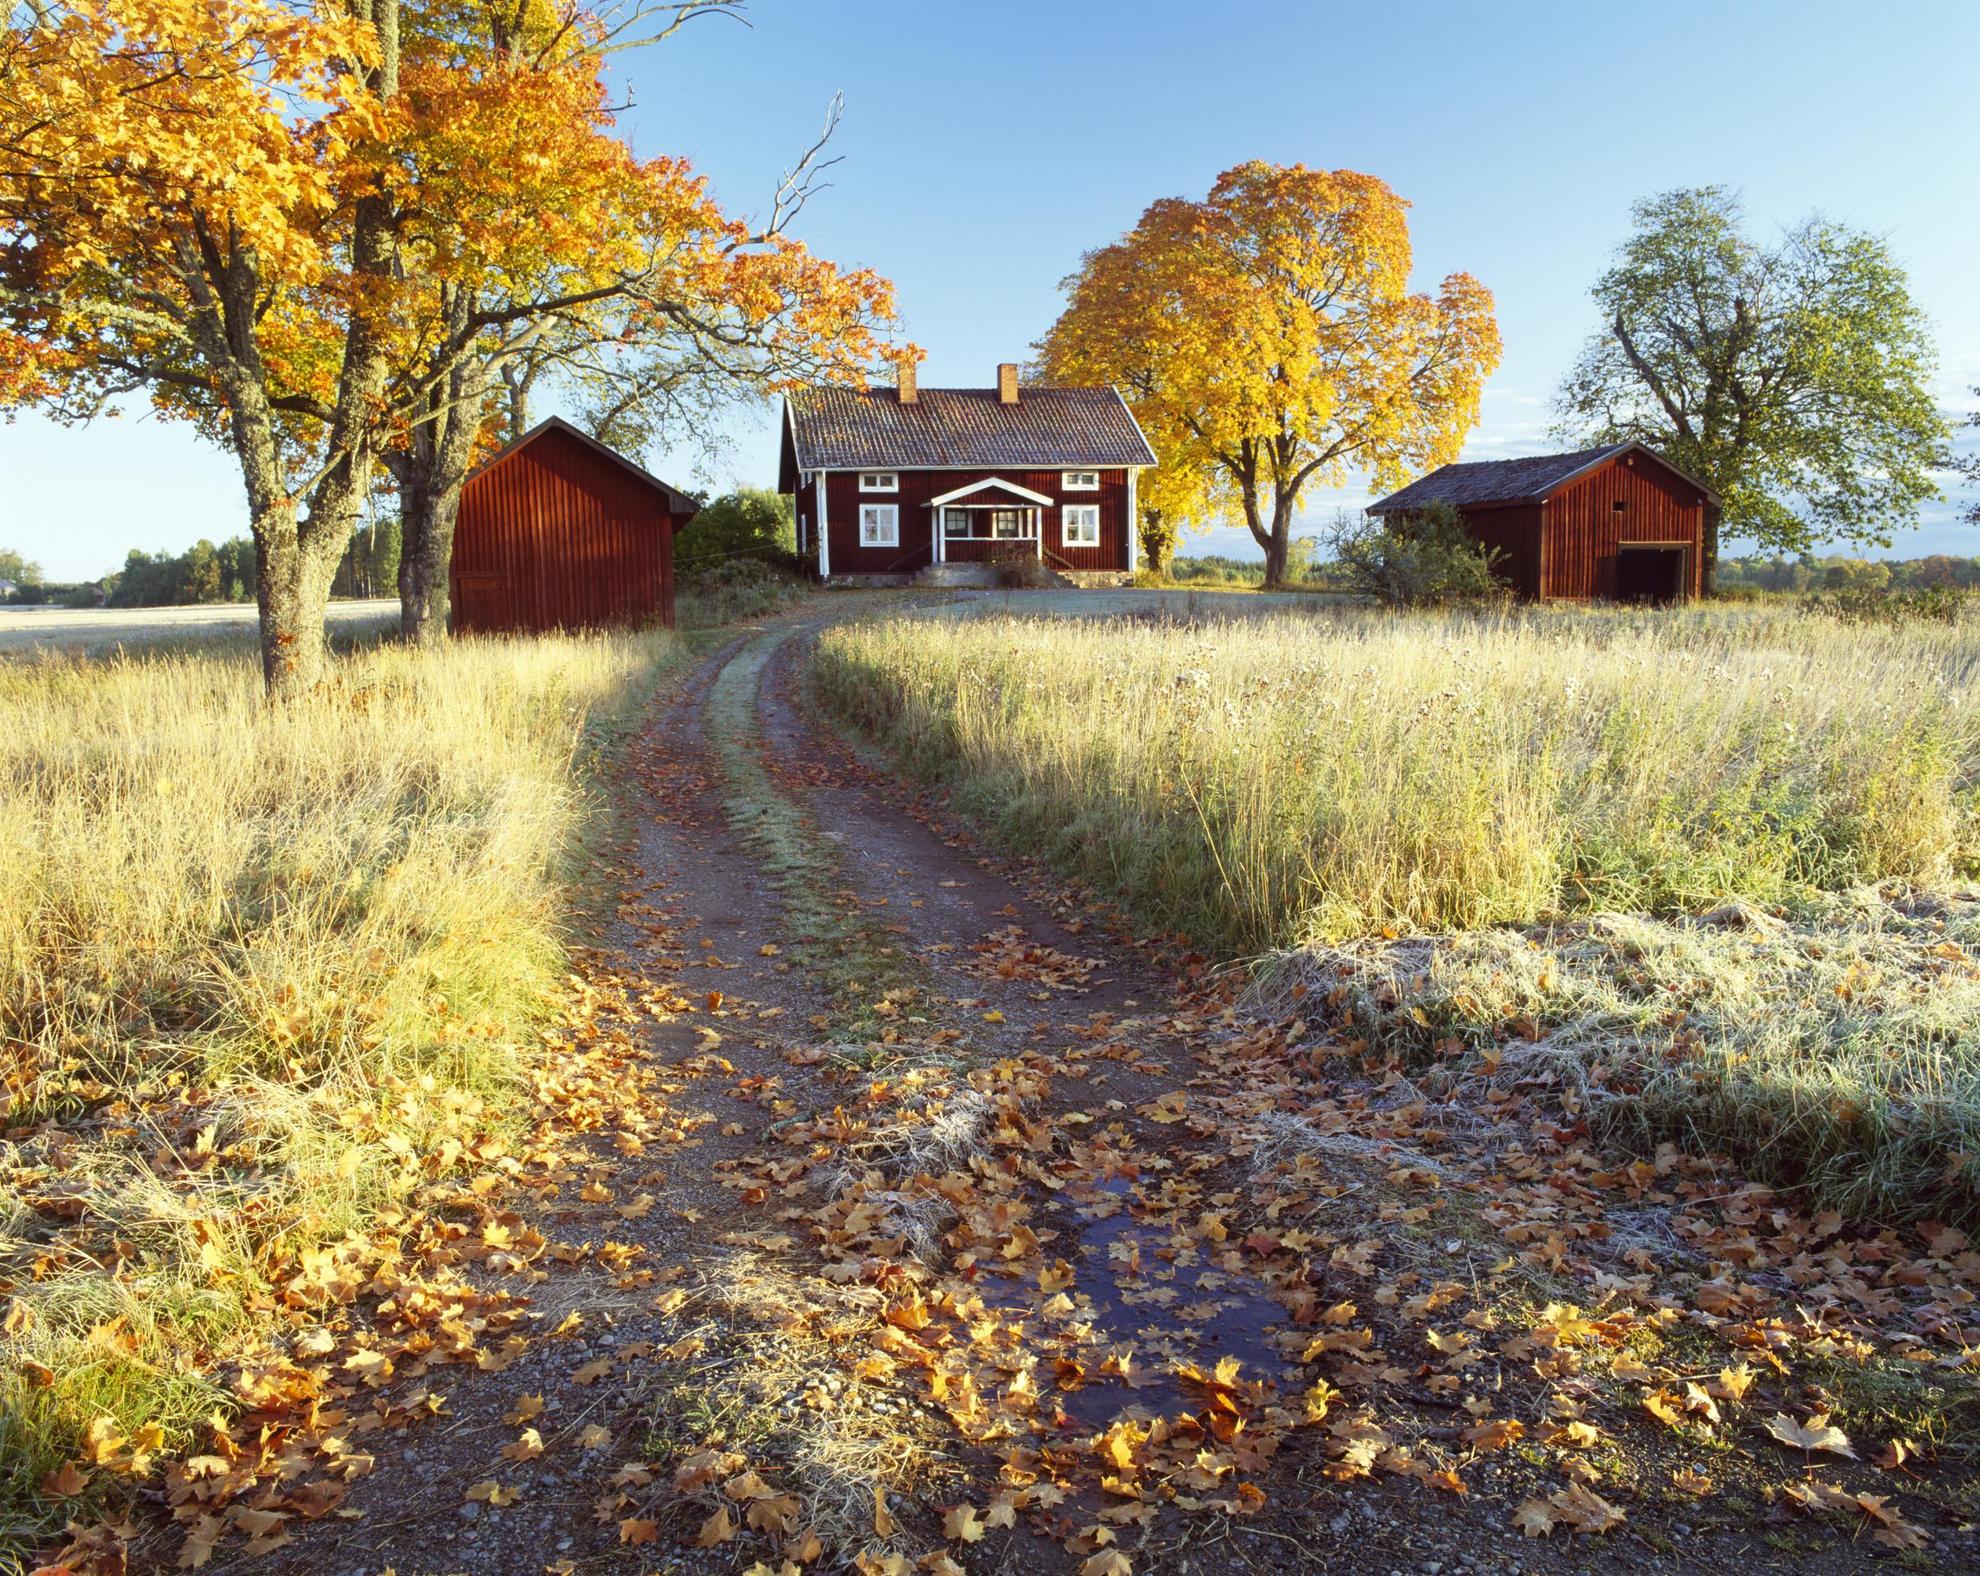 A red cabin with white trimmings are surrounded by meadows and a few trees. It is autumn and the leaves have turned yellow and orange.